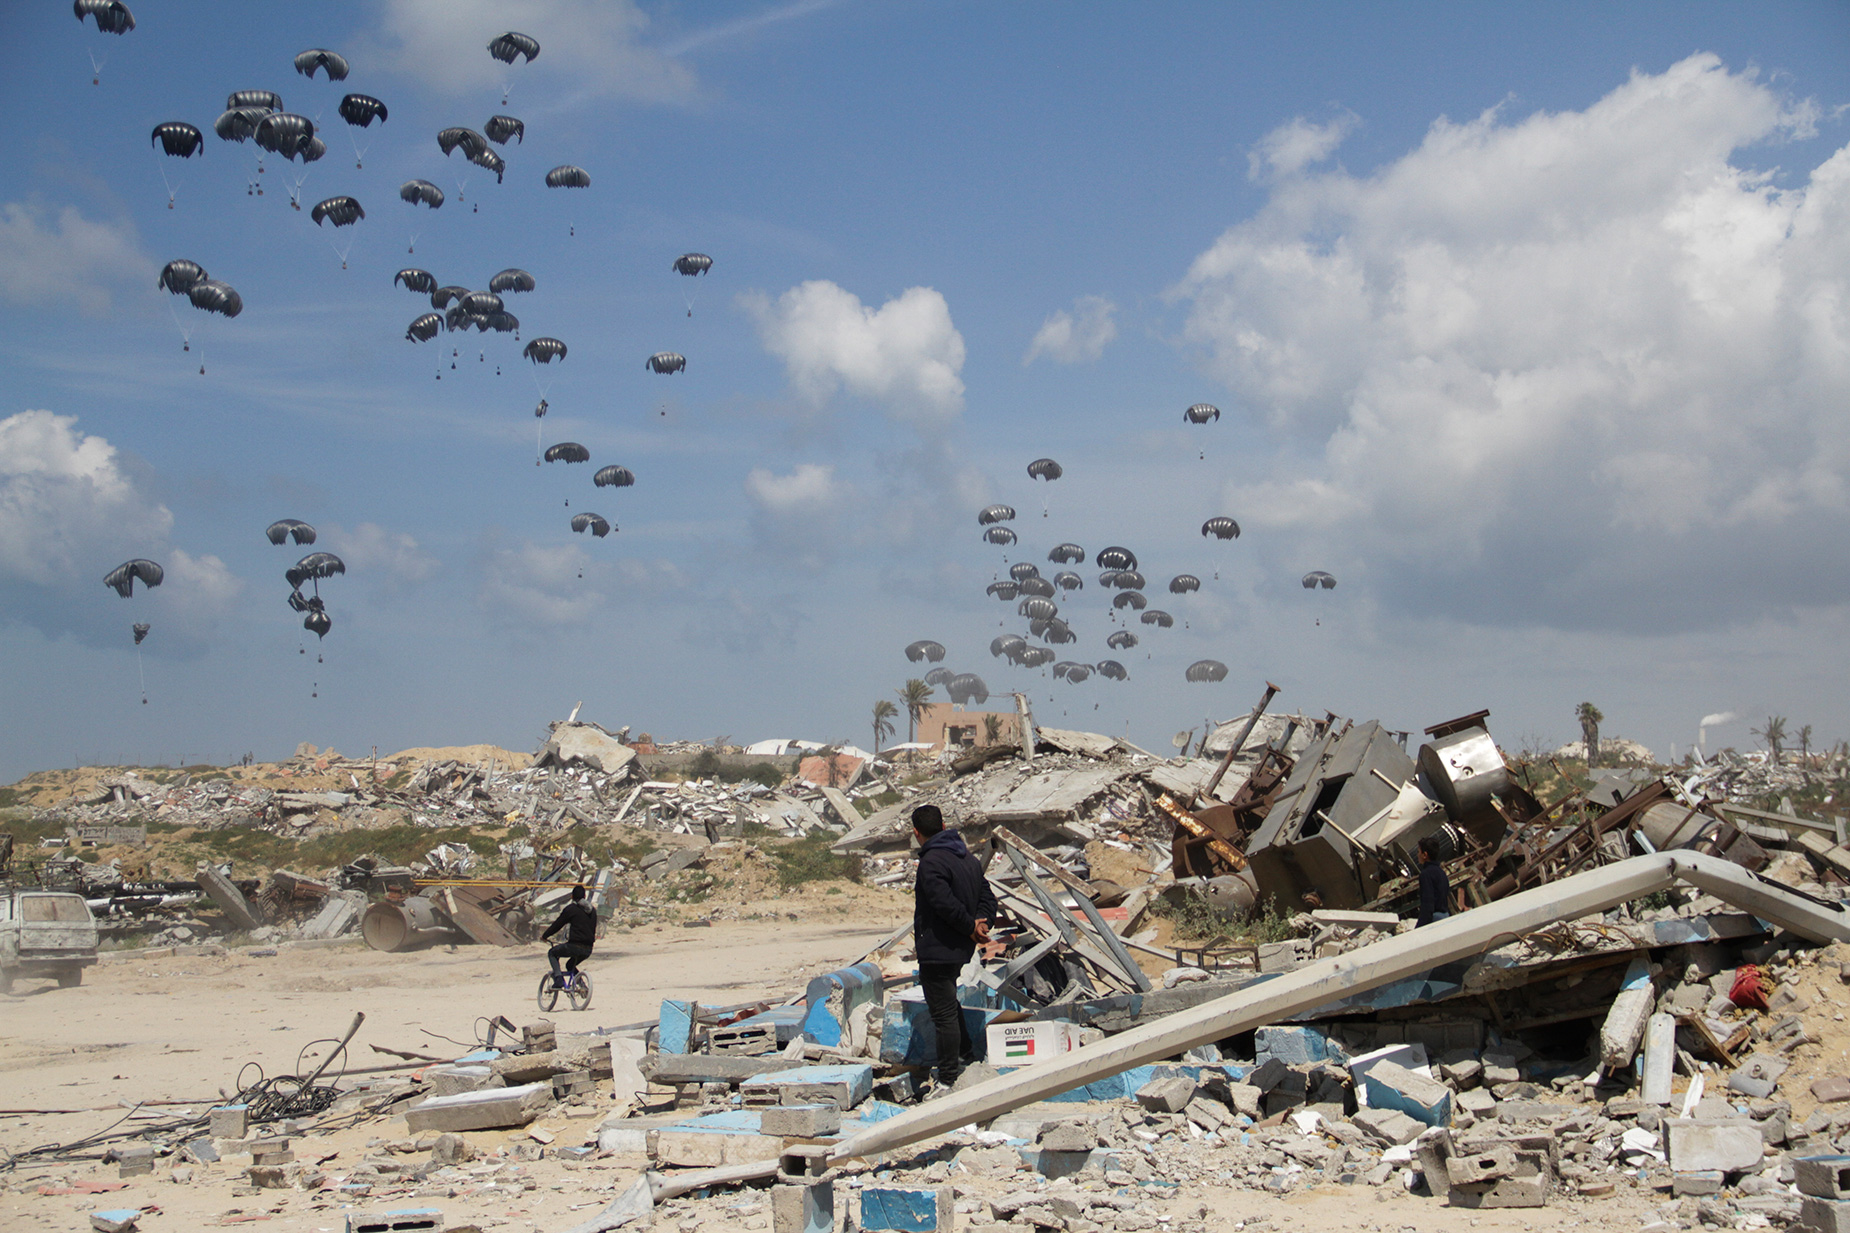 Hamas calls on Western countries to end “offensive” aid airdrops into Gaza